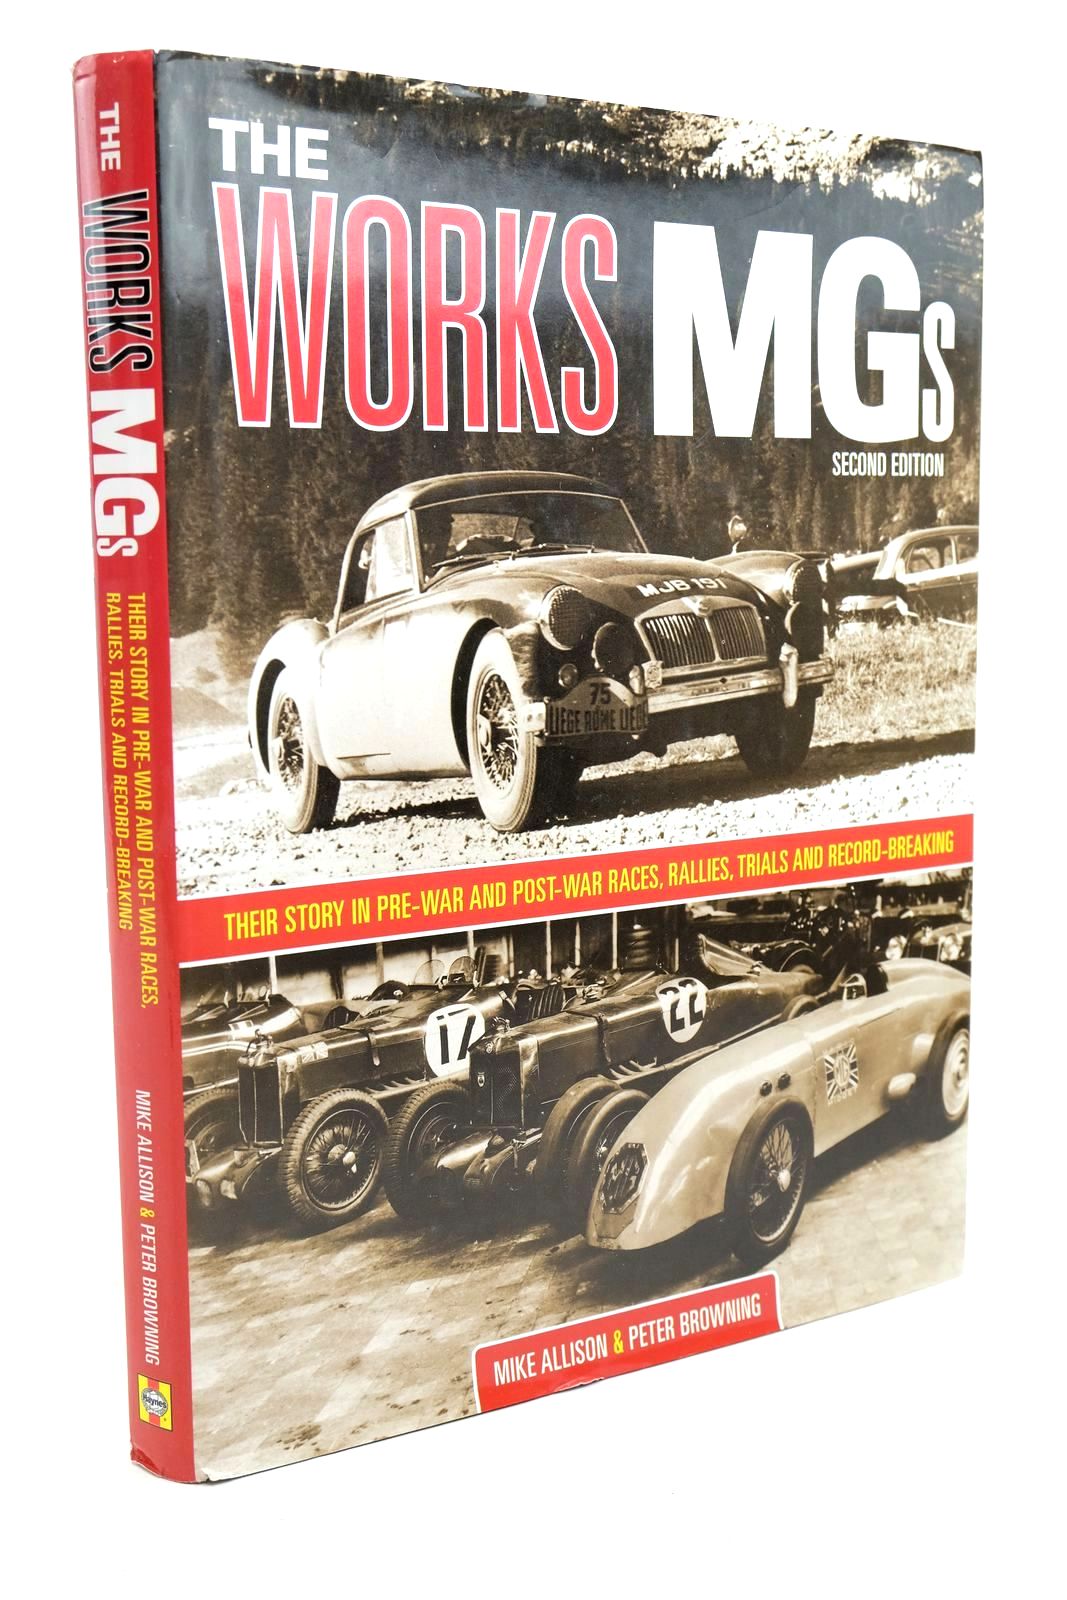 Photo of THE WORKS MGS written by Allison, Mike Browning, Peter published by Haynes Publishing Group (STOCK CODE: 1321181)  for sale by Stella & Rose's Books